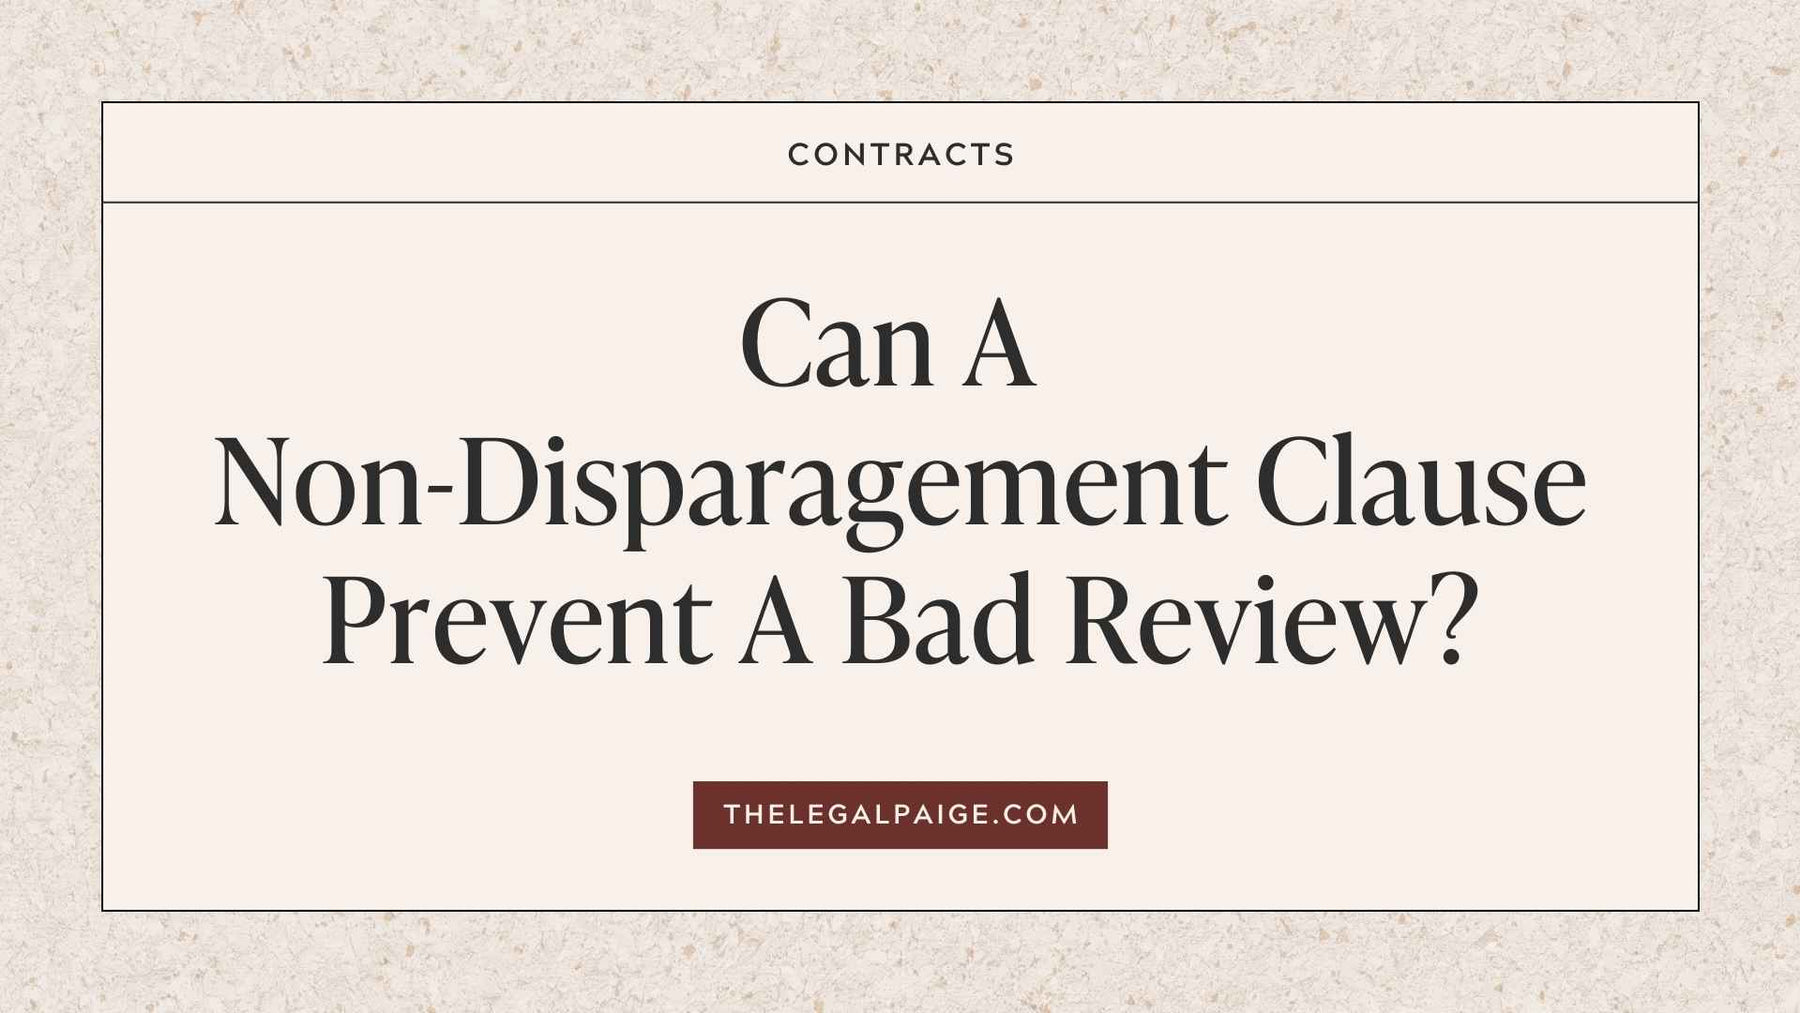 Can A Non-Disparagement Clause Prevent A Bad Review?